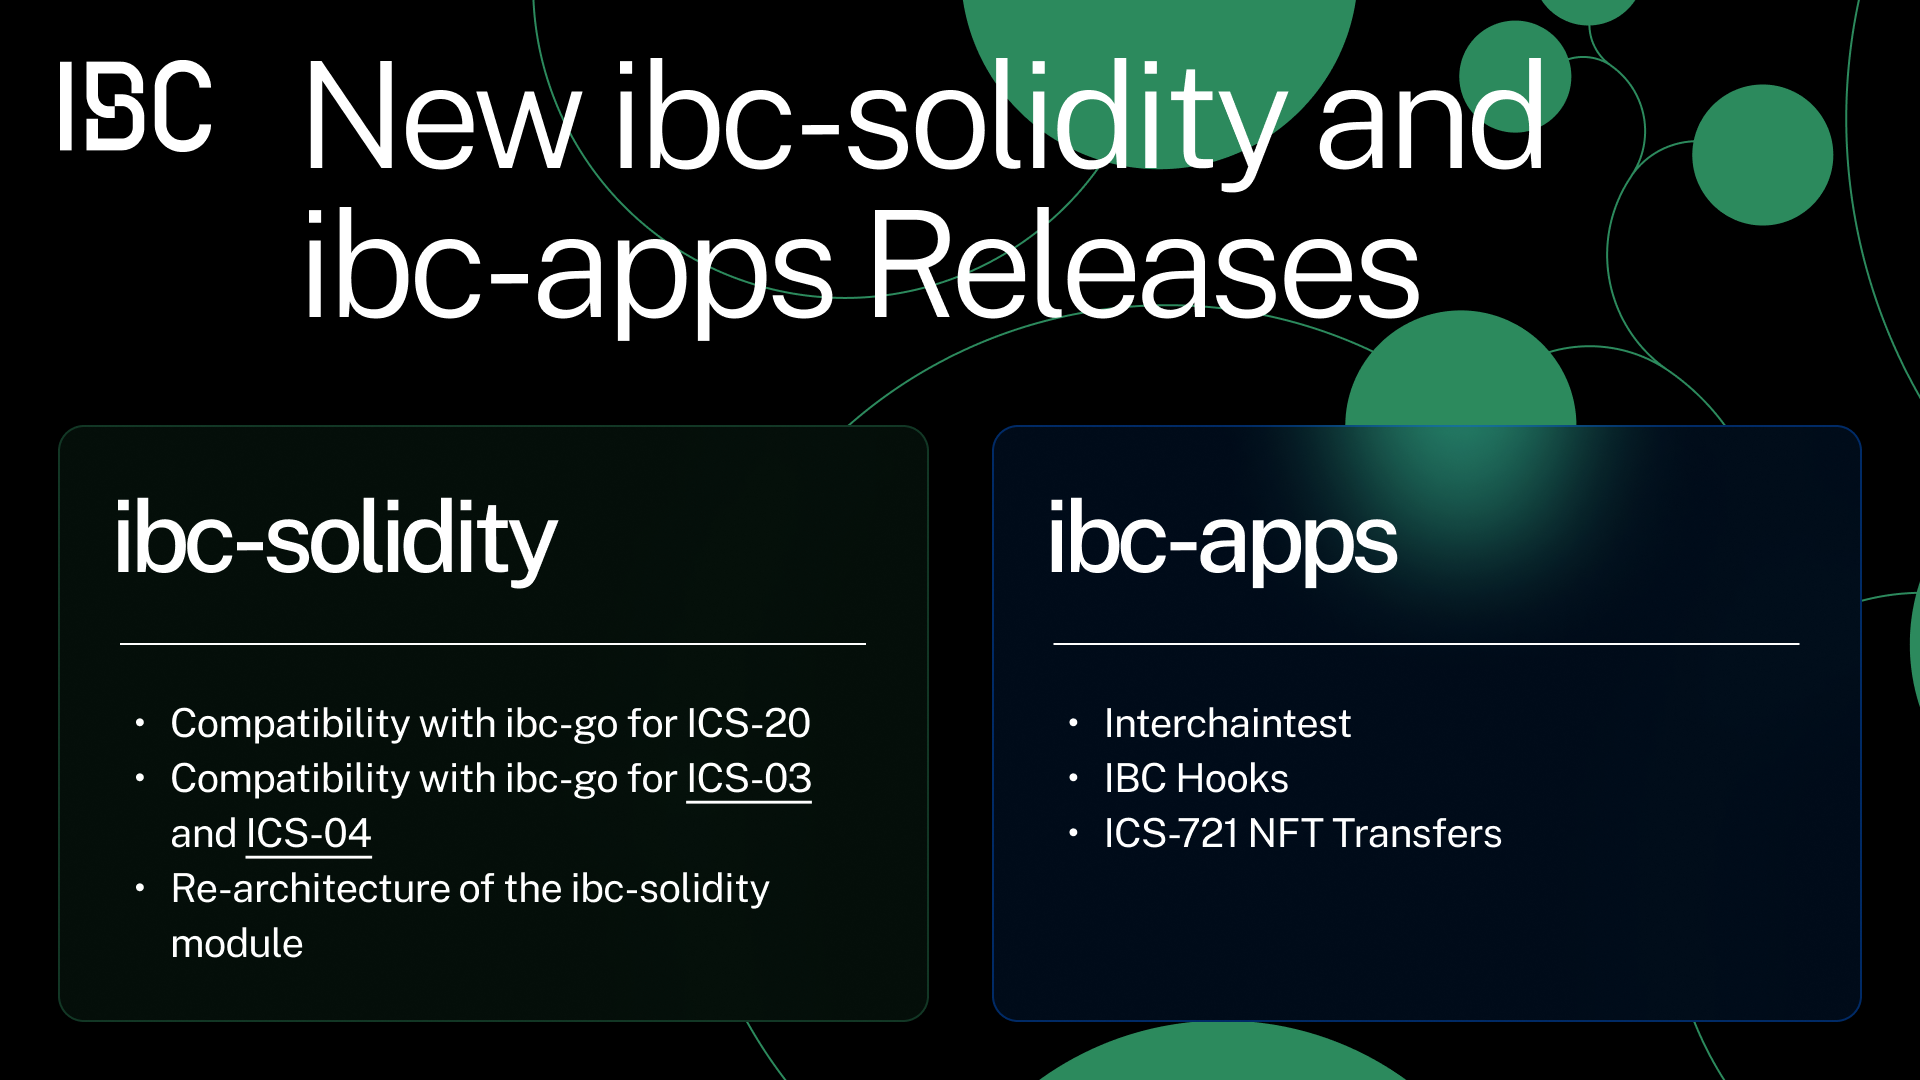 Ibc-solidity and ibc-apps releases in 2023.